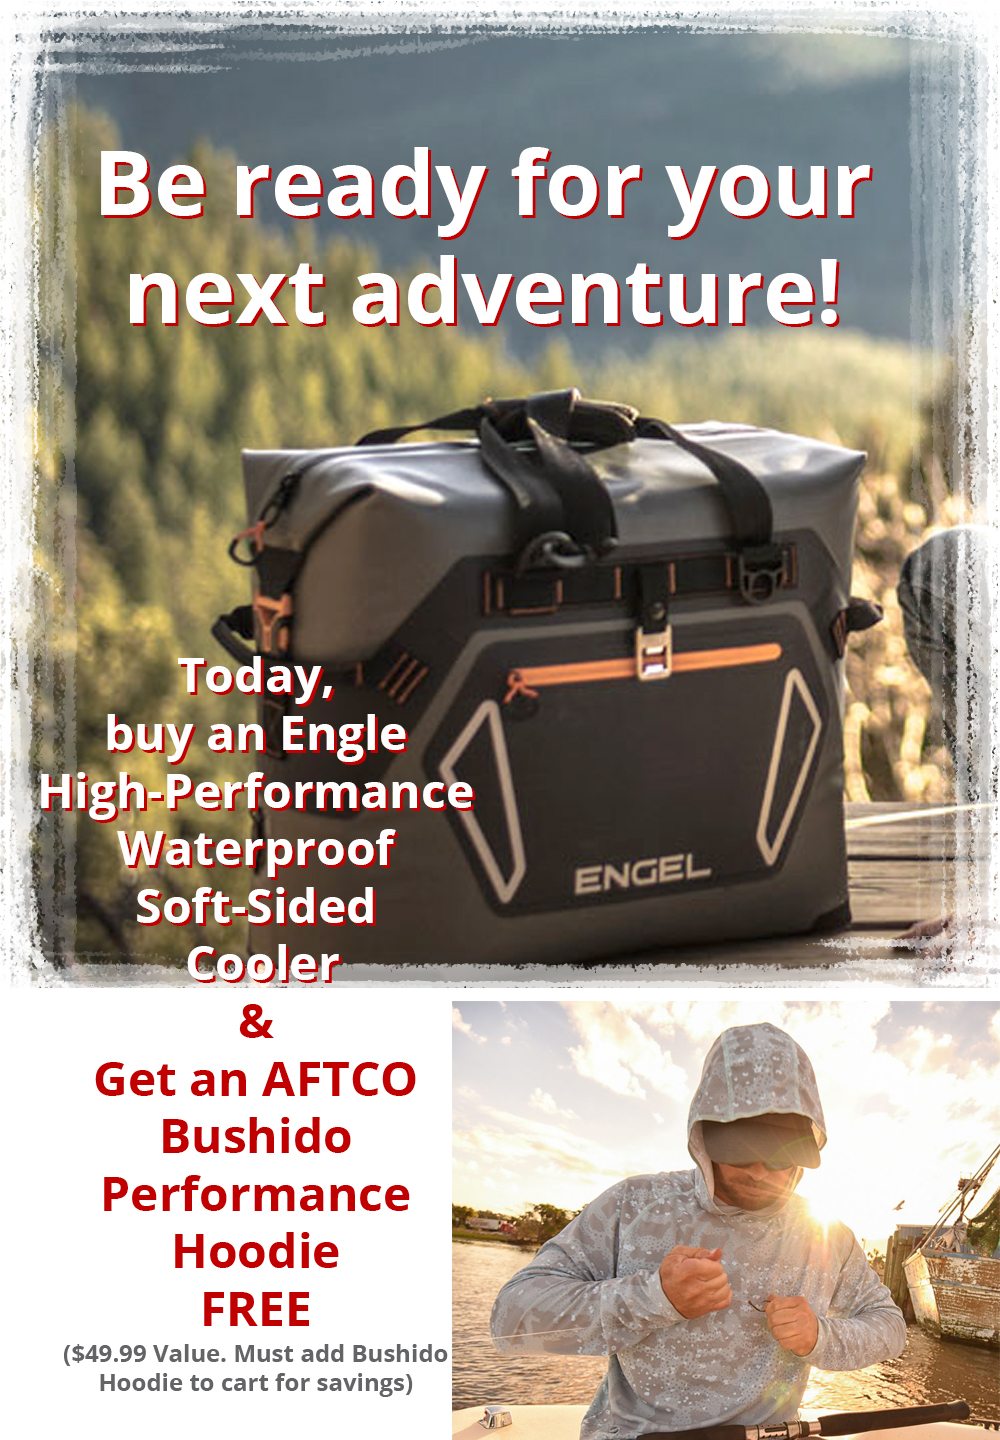 Buy an Engle High-Performance Waterproof Soft-Sided Cooler and get an AFTCO Bushido Hoodie FREE